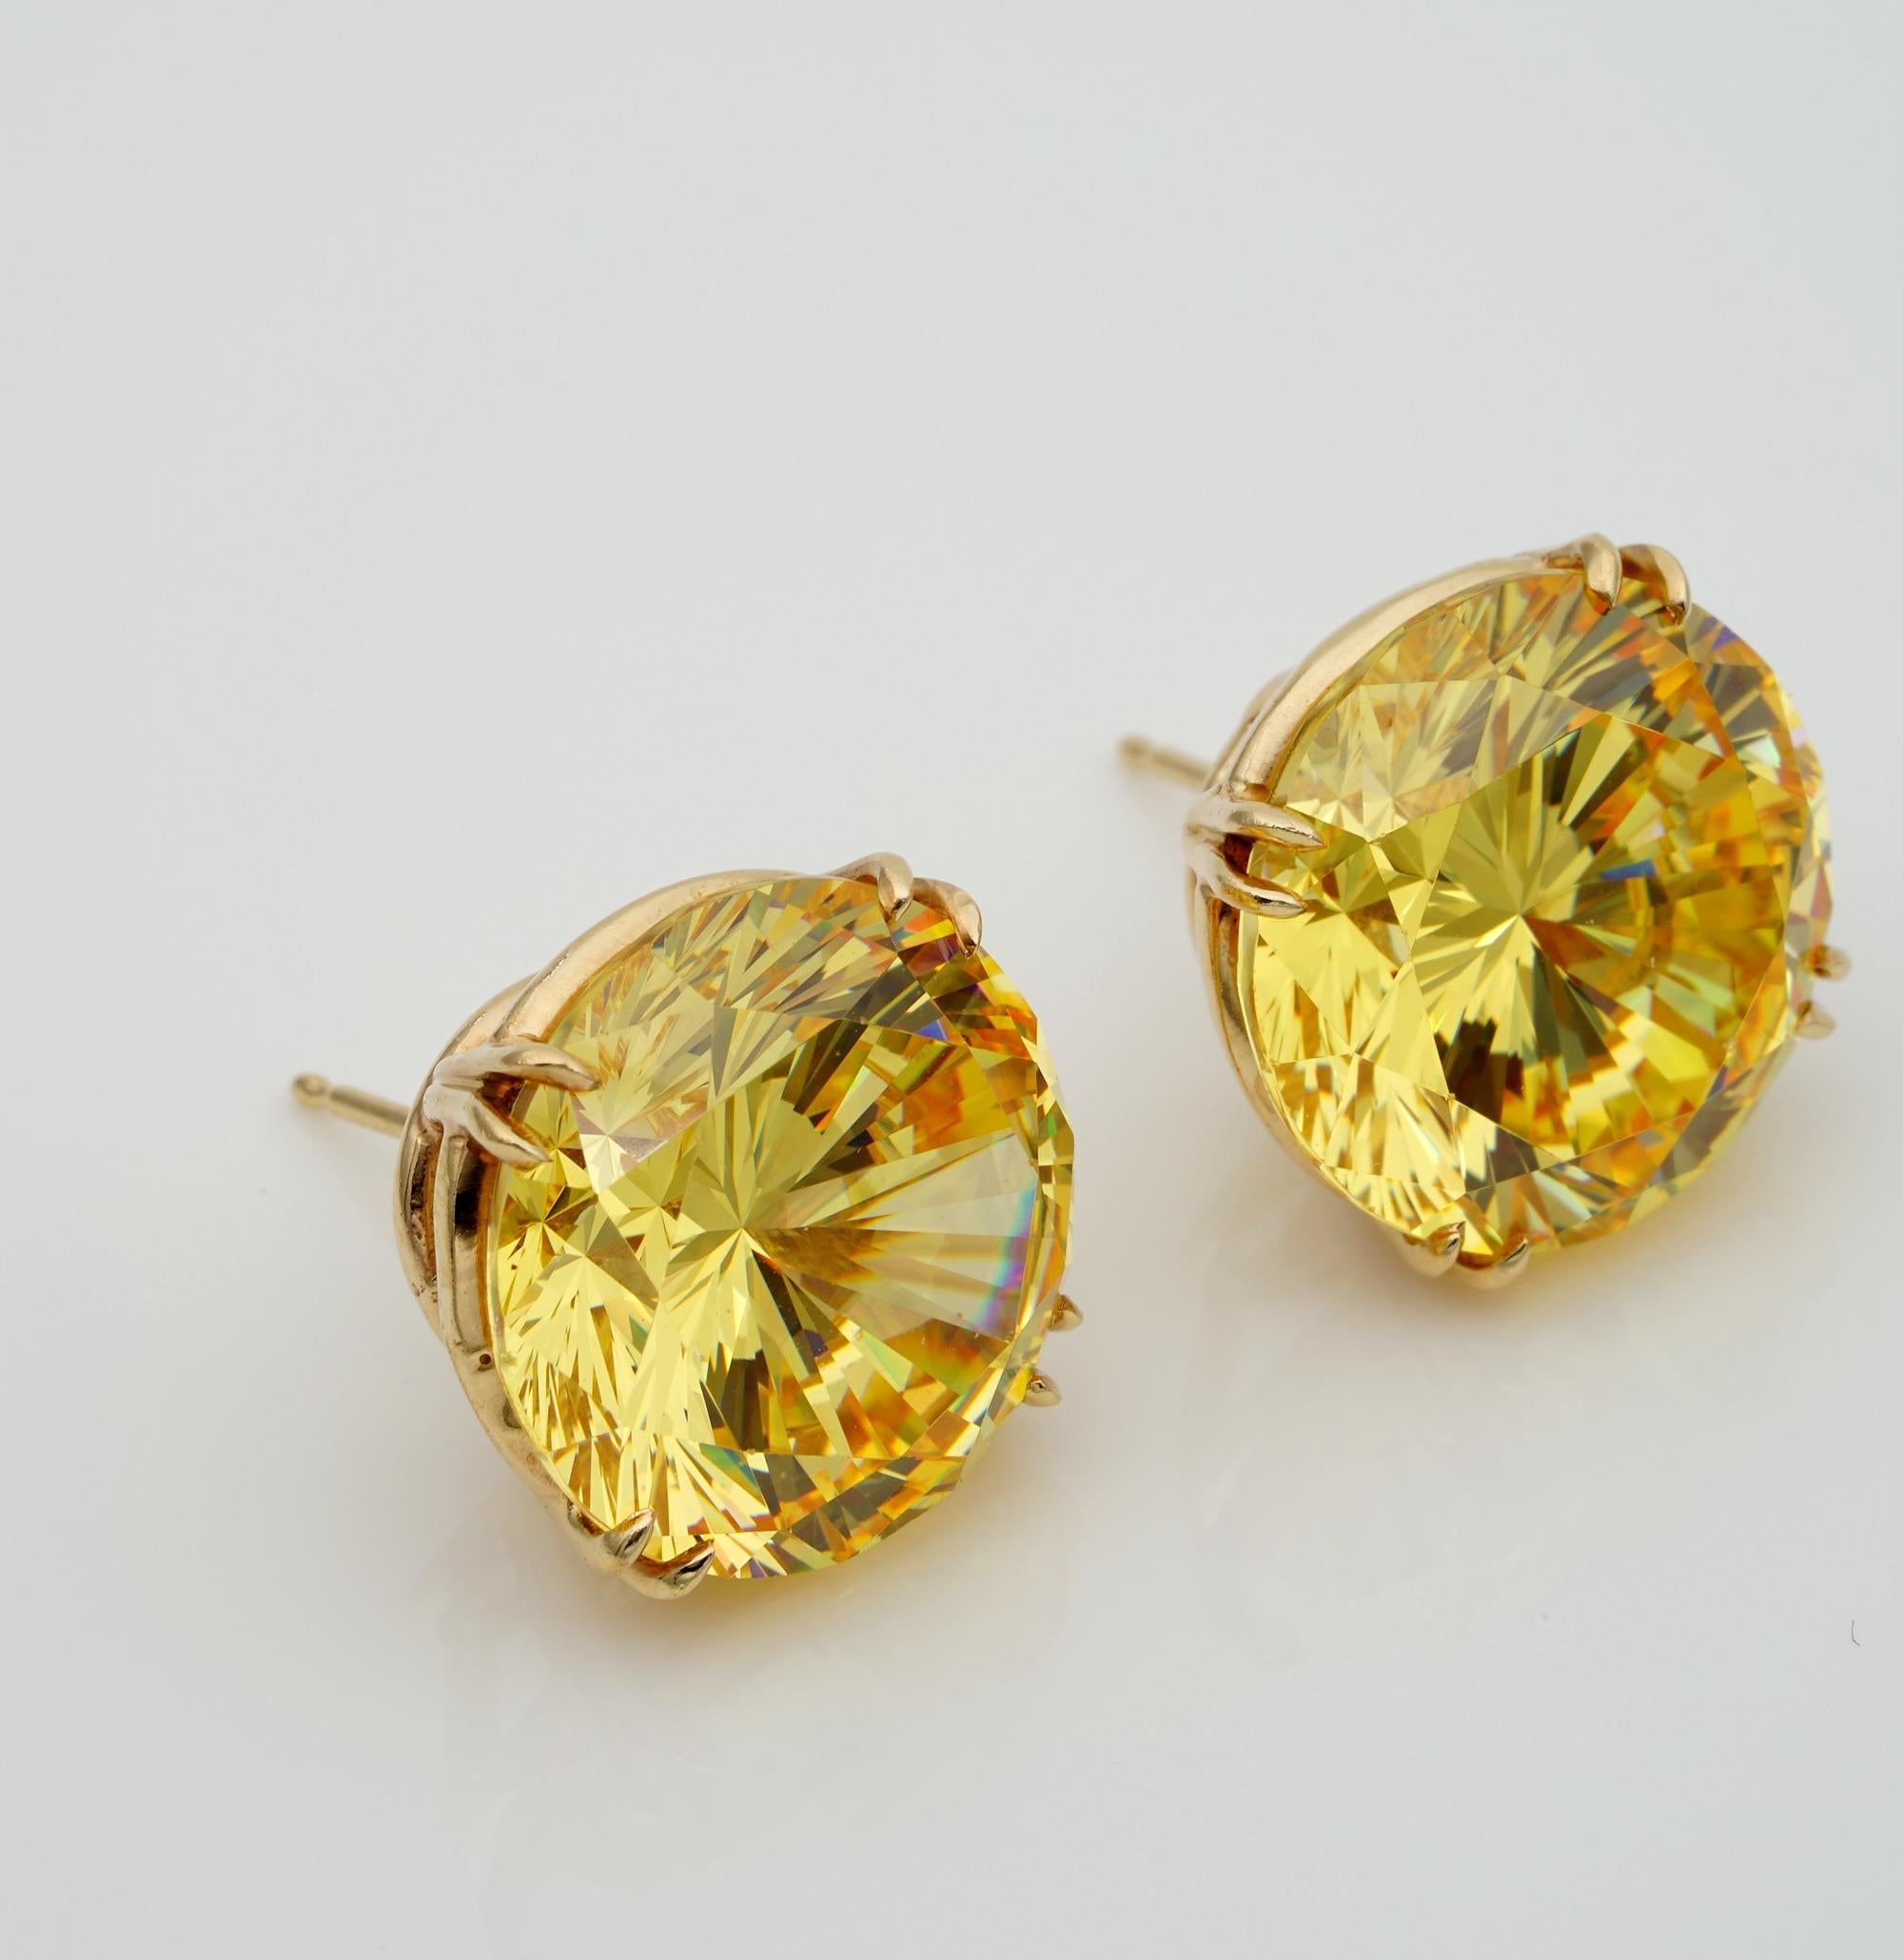 Contemporary Exceptional Pair 41.60 Carat of Rare Mali Garnet Stud Earrings For Sale